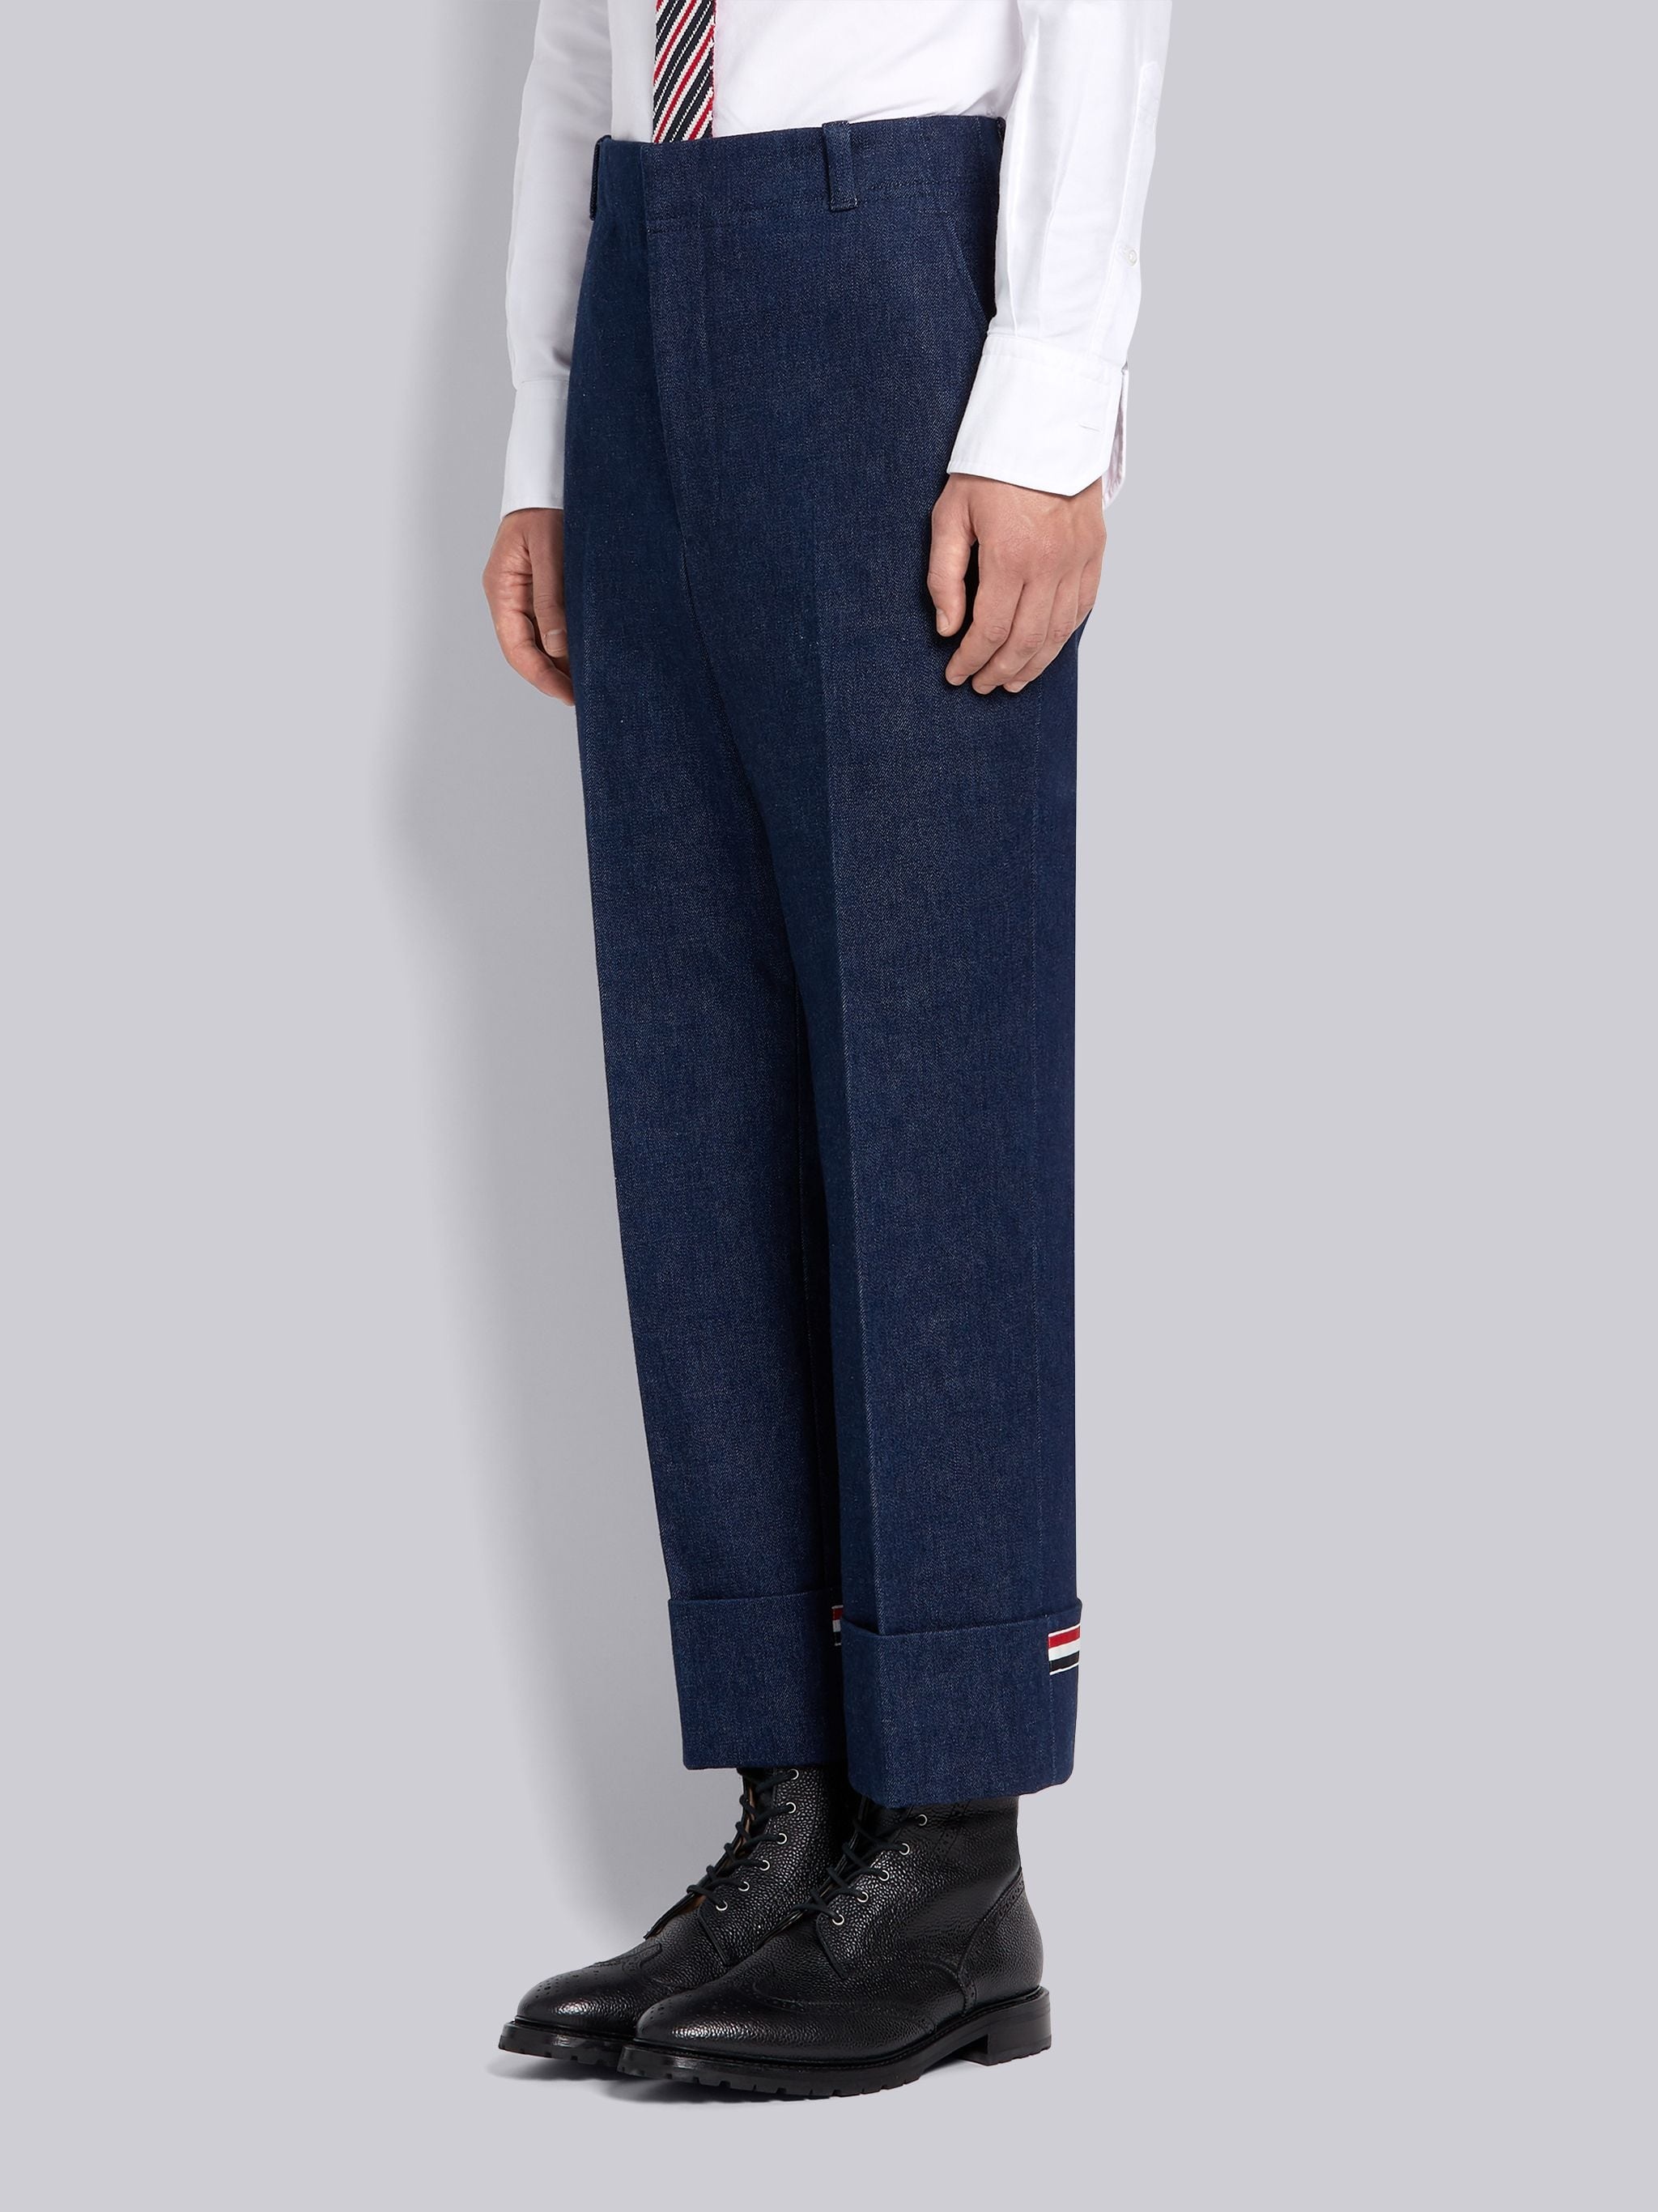 Navy Washed Cotton Denim Deconstructed Cuffed Classic Trouser - 2